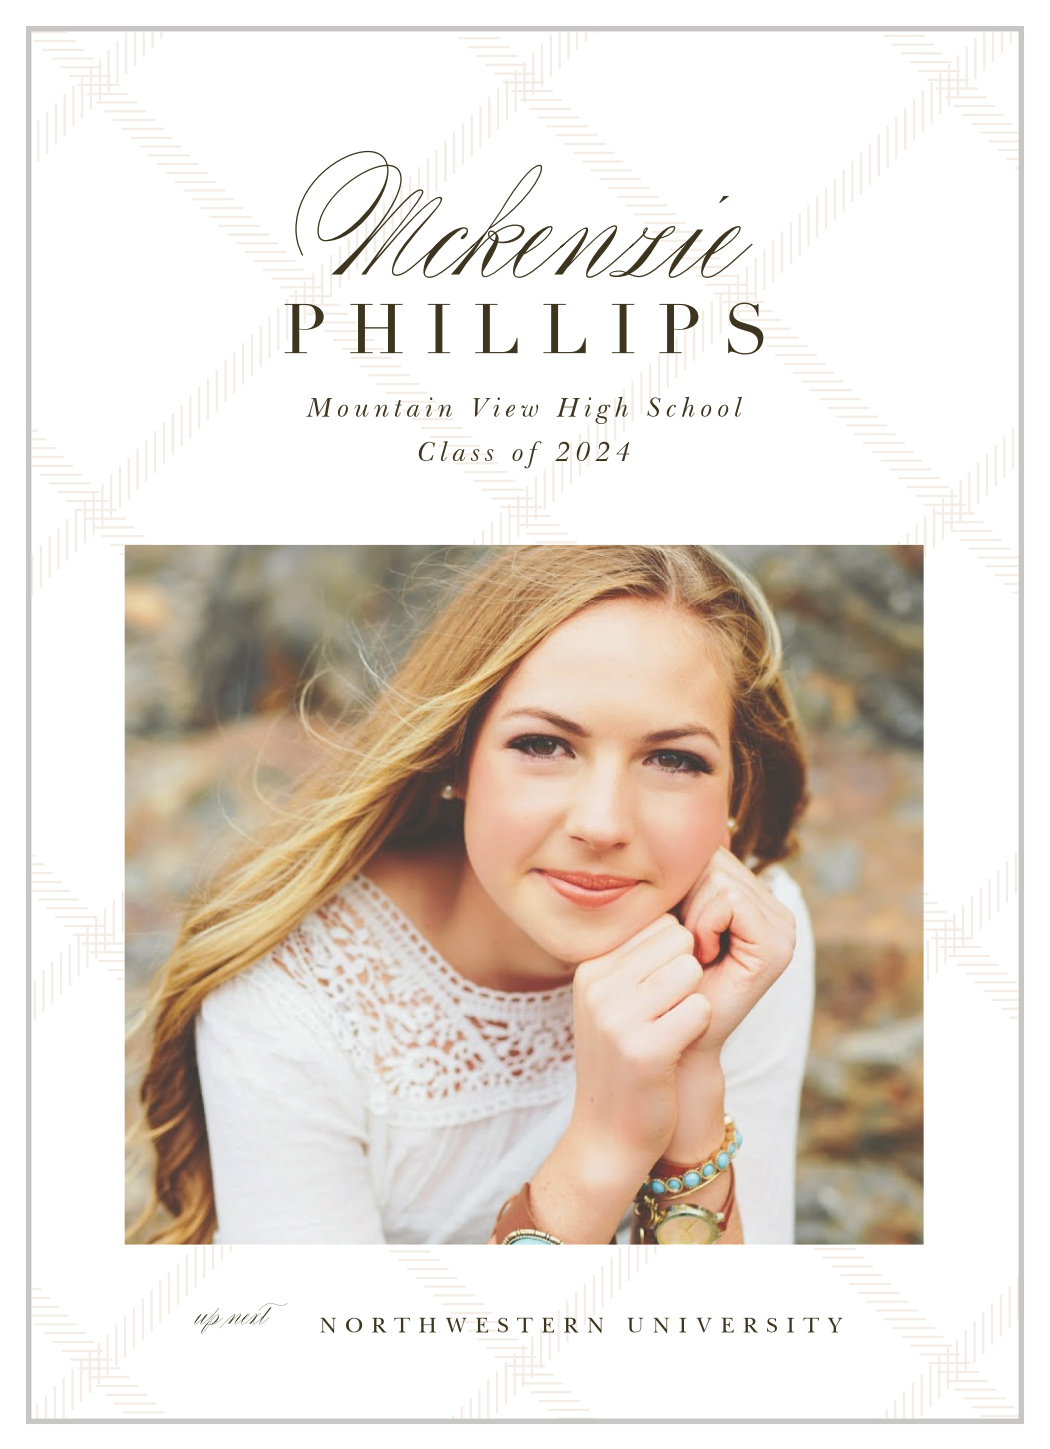 Framed Pattern Graduation Announcements by Basic Invite